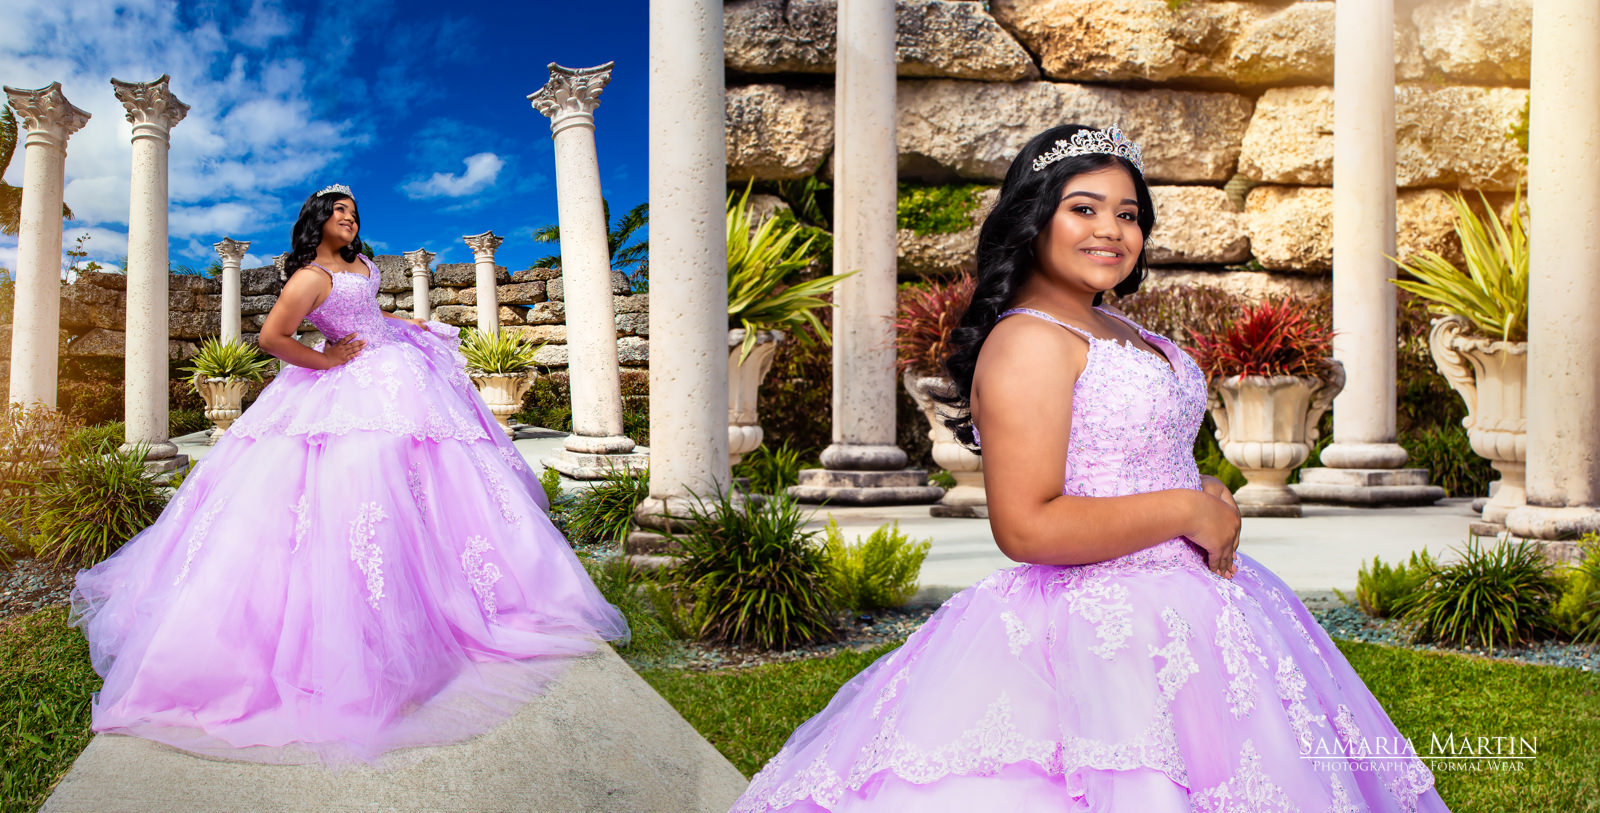 15 photoshoot with flowers, best Tampa photographer, Samaria Martin, red quinceanera dresses, Marys Bridal, Villa Turqueza 3